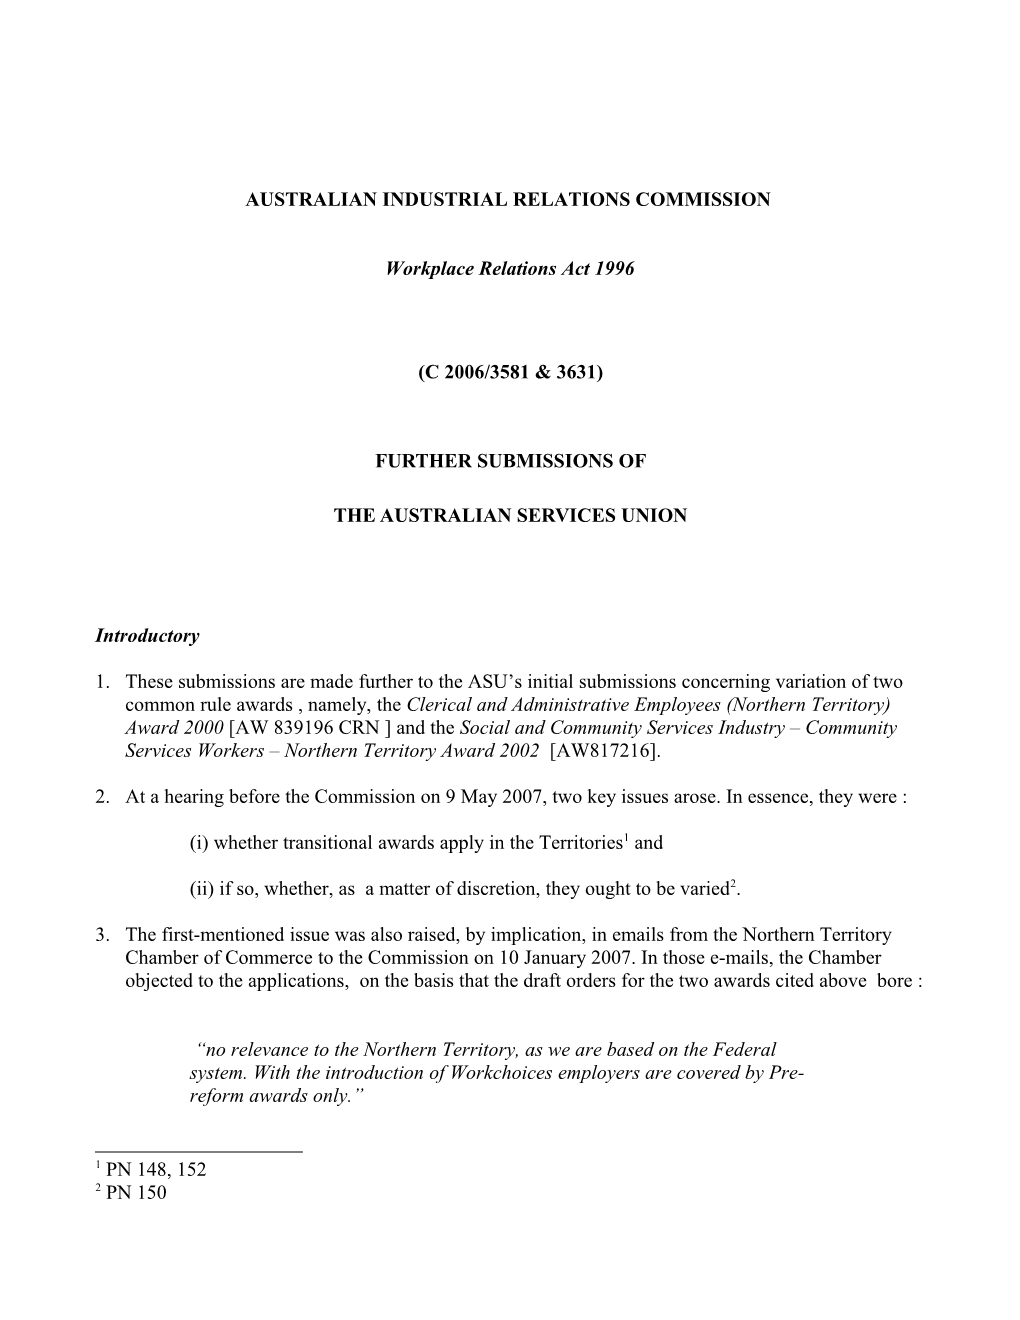 Australian Industrial Relations Commission s1